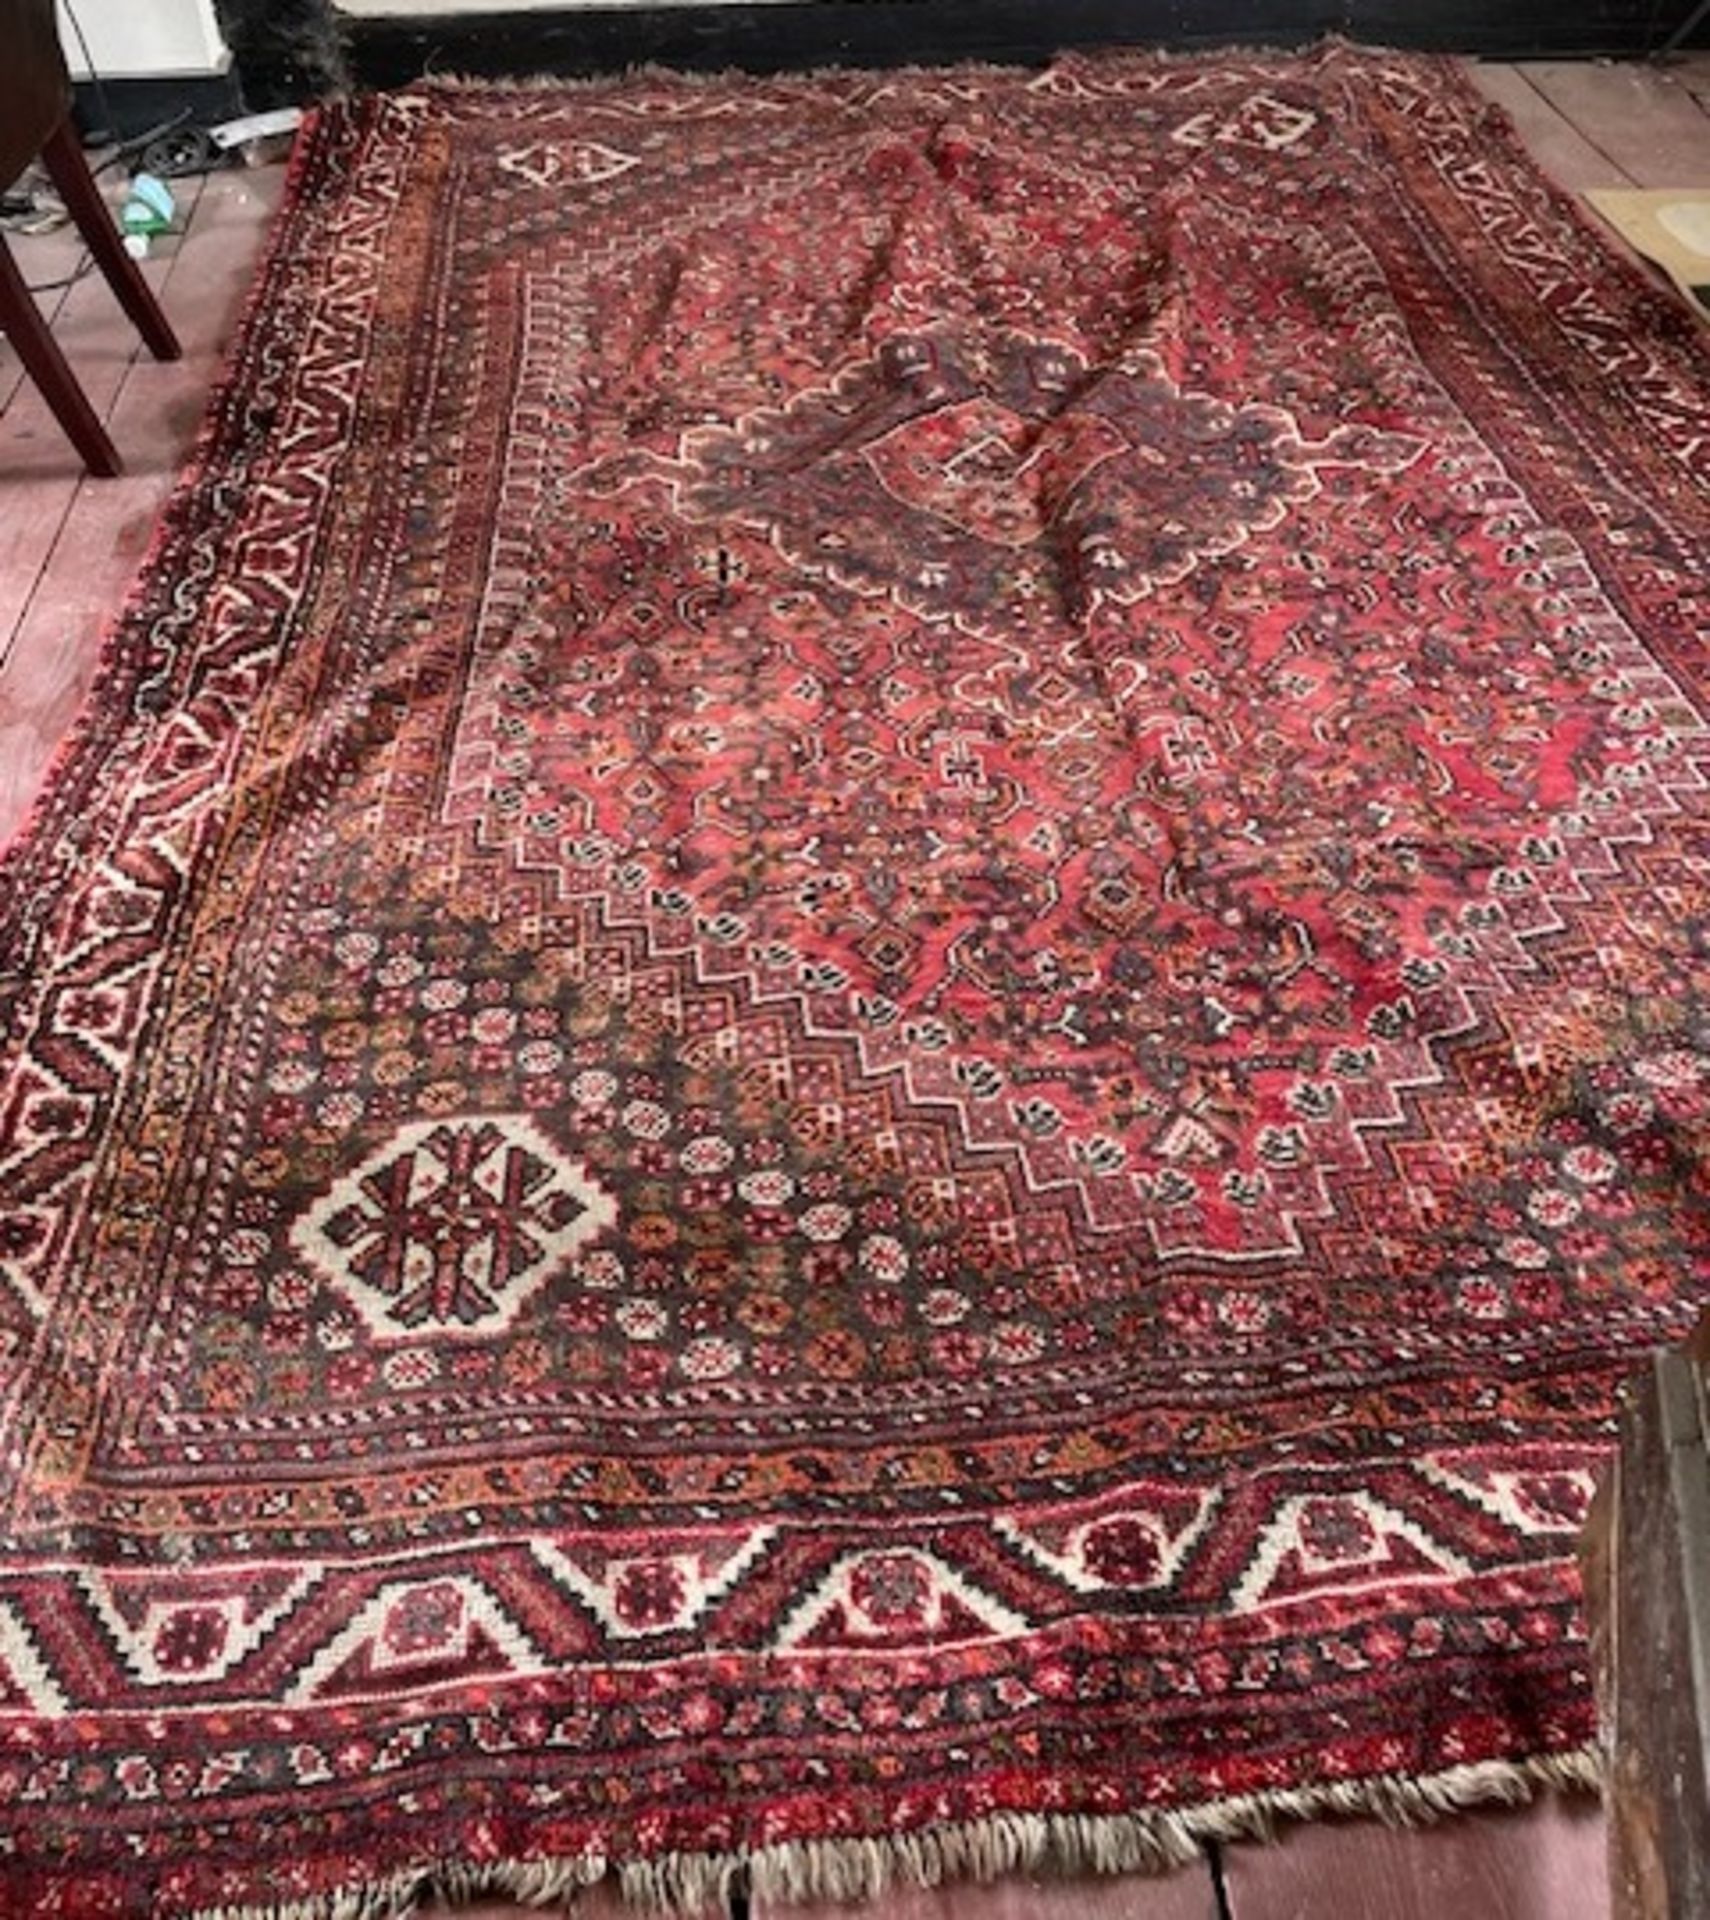 Patterned & Bordered Rug, Central Motif Surrounded by Stylized Floral Decoration & Multi Border, - Image 2 of 2